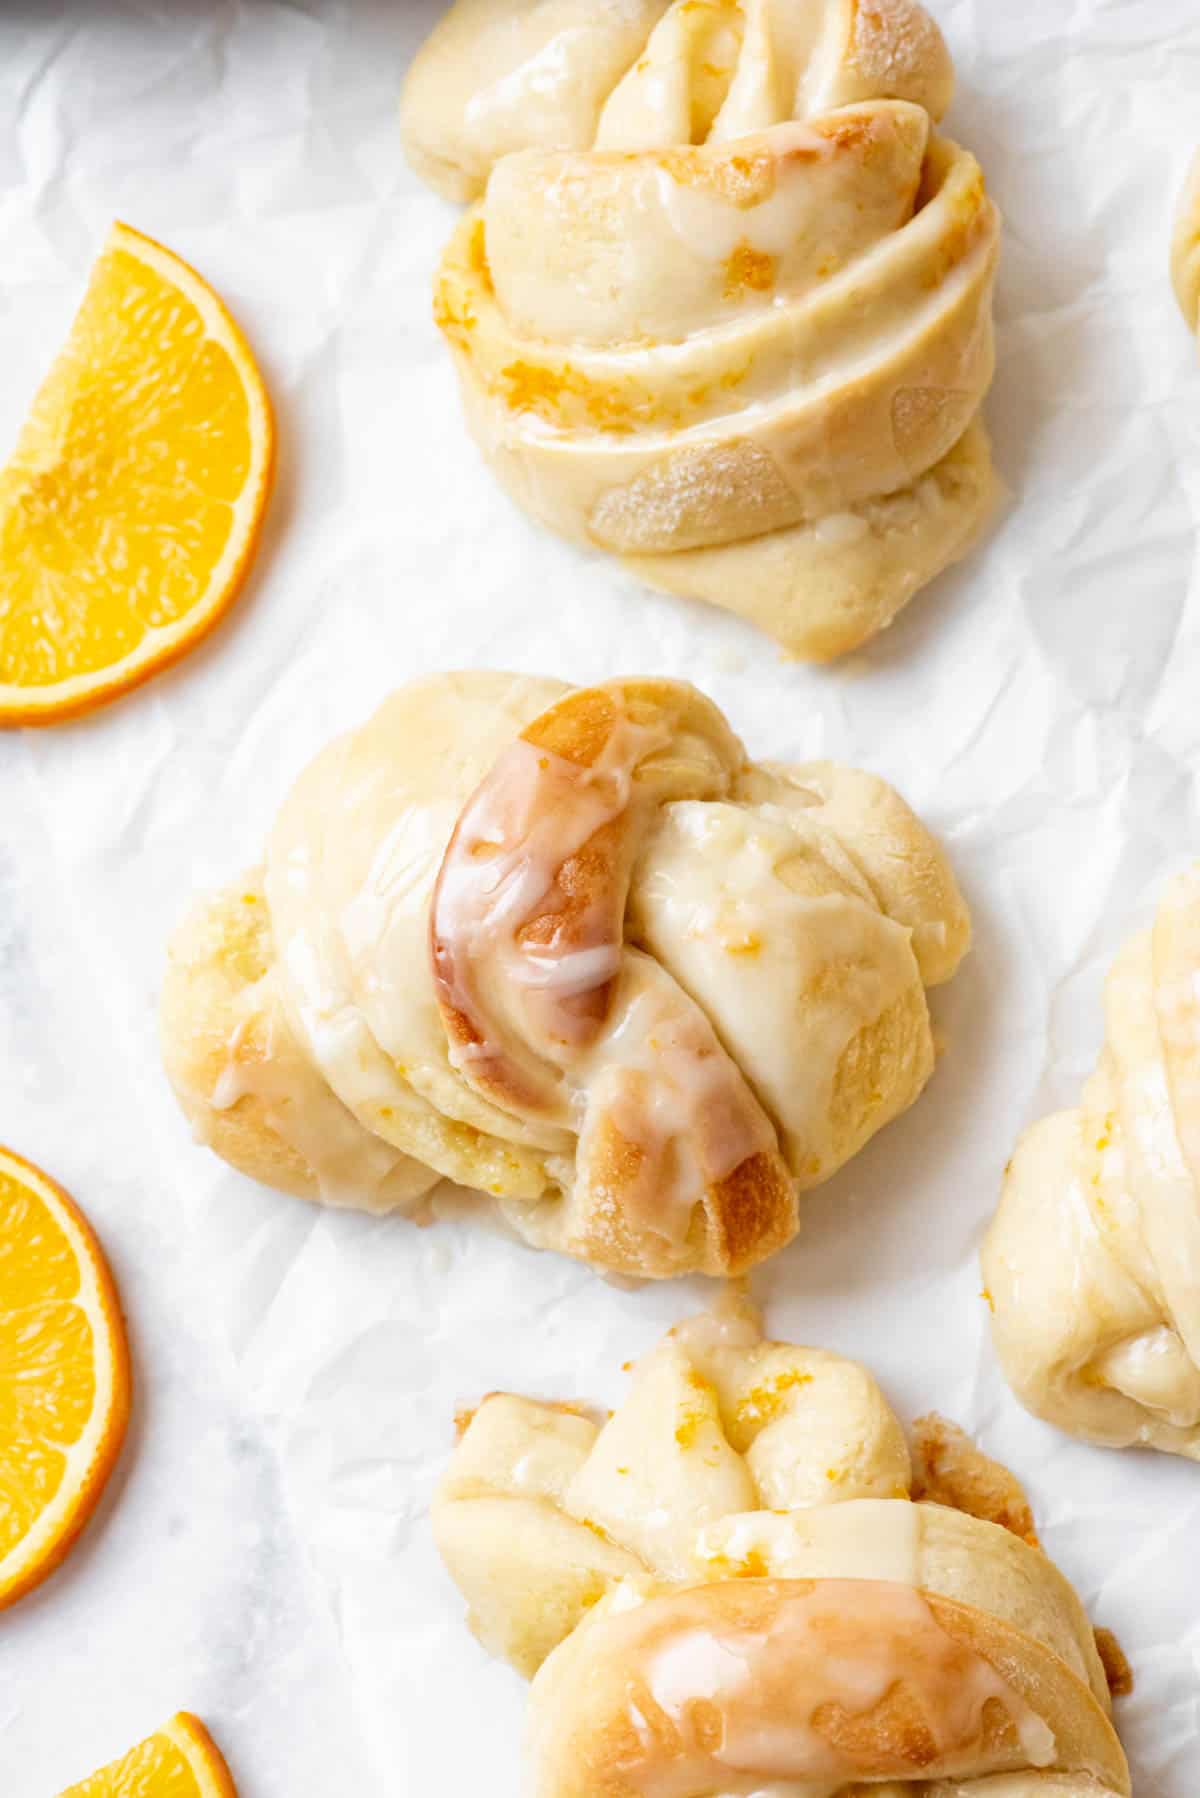 An overhead image of a knotted orange sweet roll on parchment paper next to more rolls.